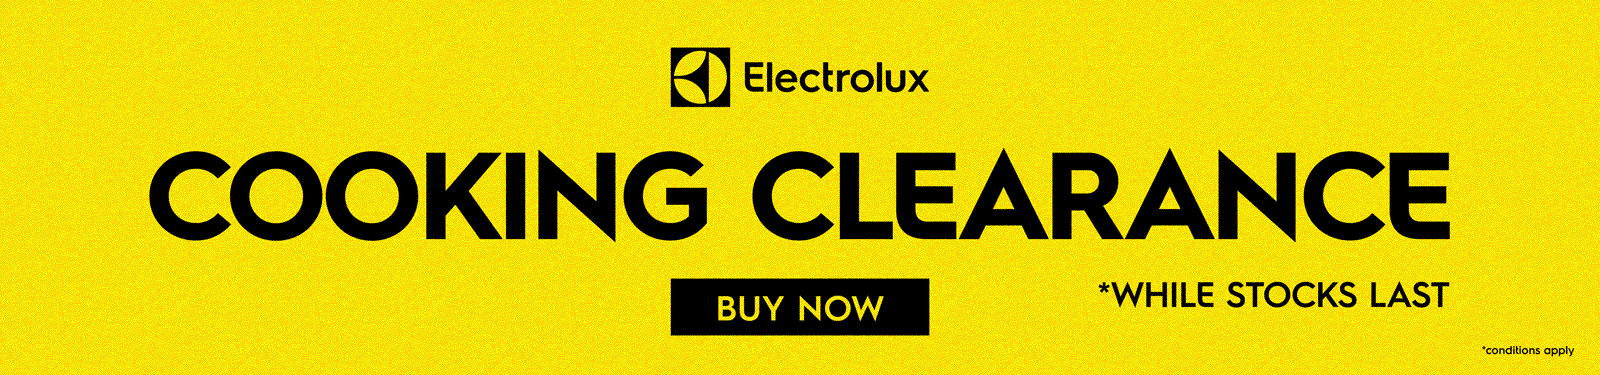 Electrolux Cooking Clearance